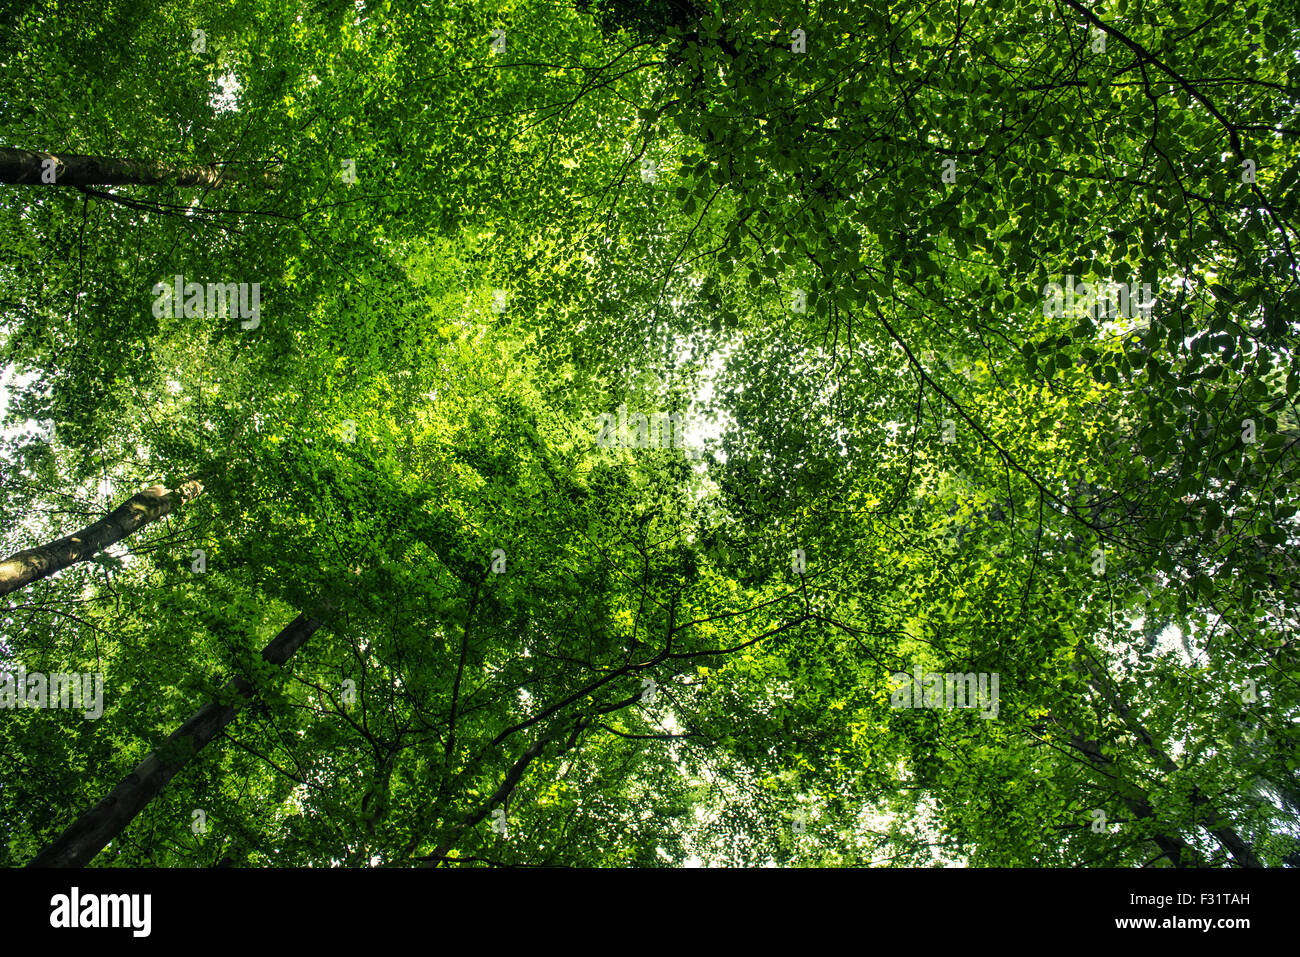 Green trees against the shiny sky background Stock Photo